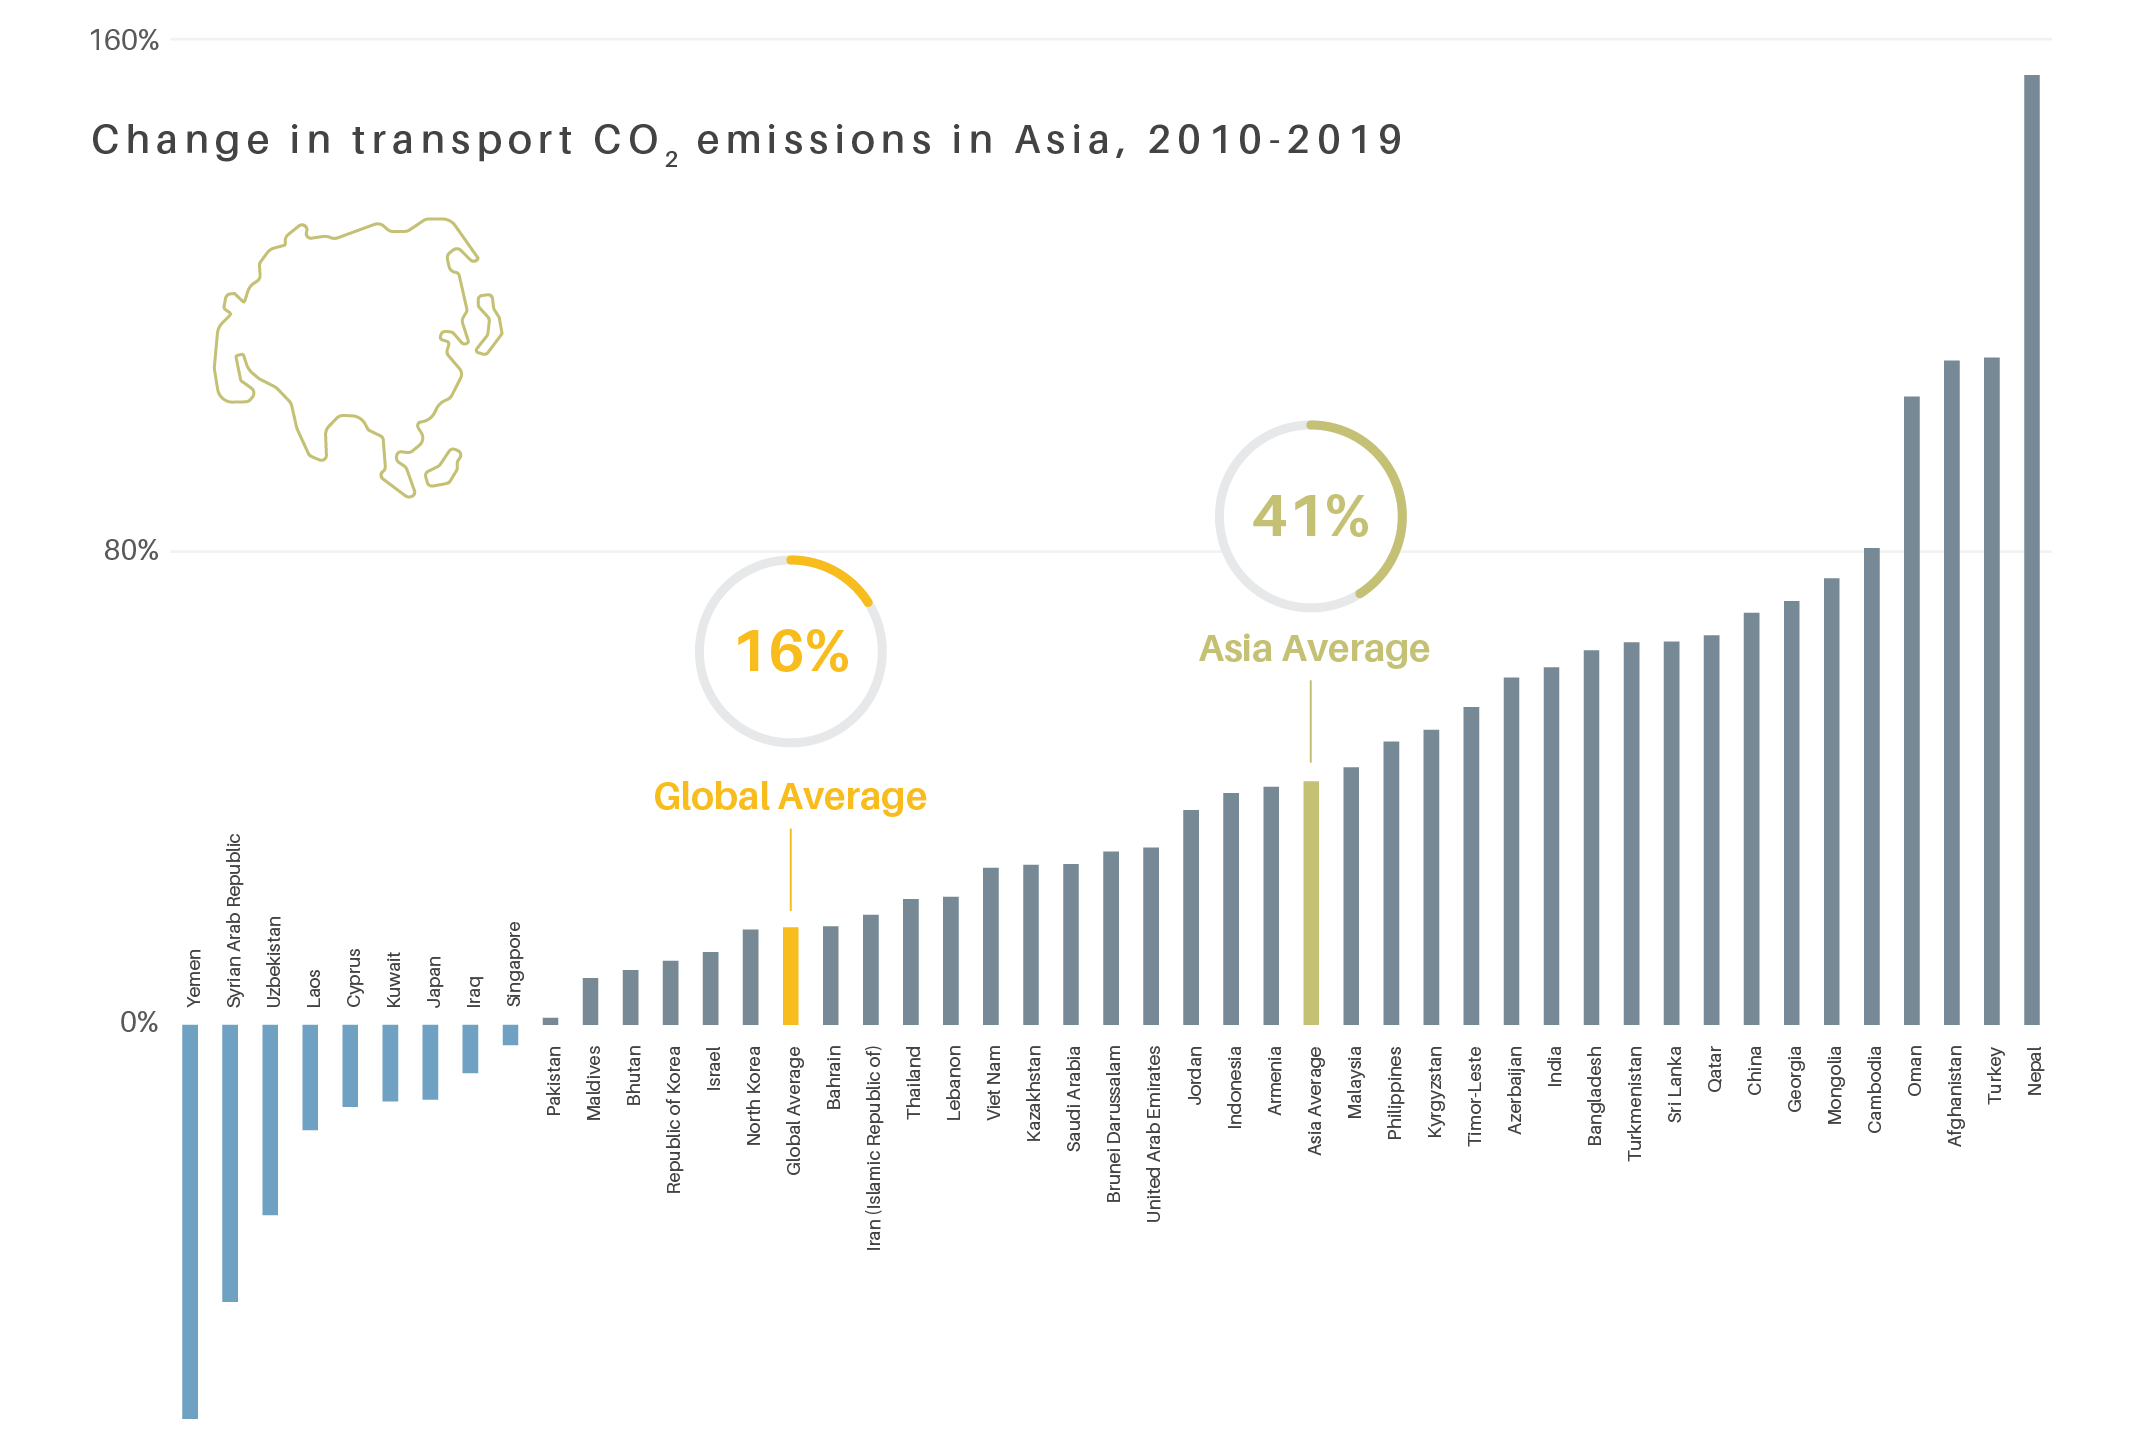 Change in transport CO2 emissions in Asia, 2010-2019